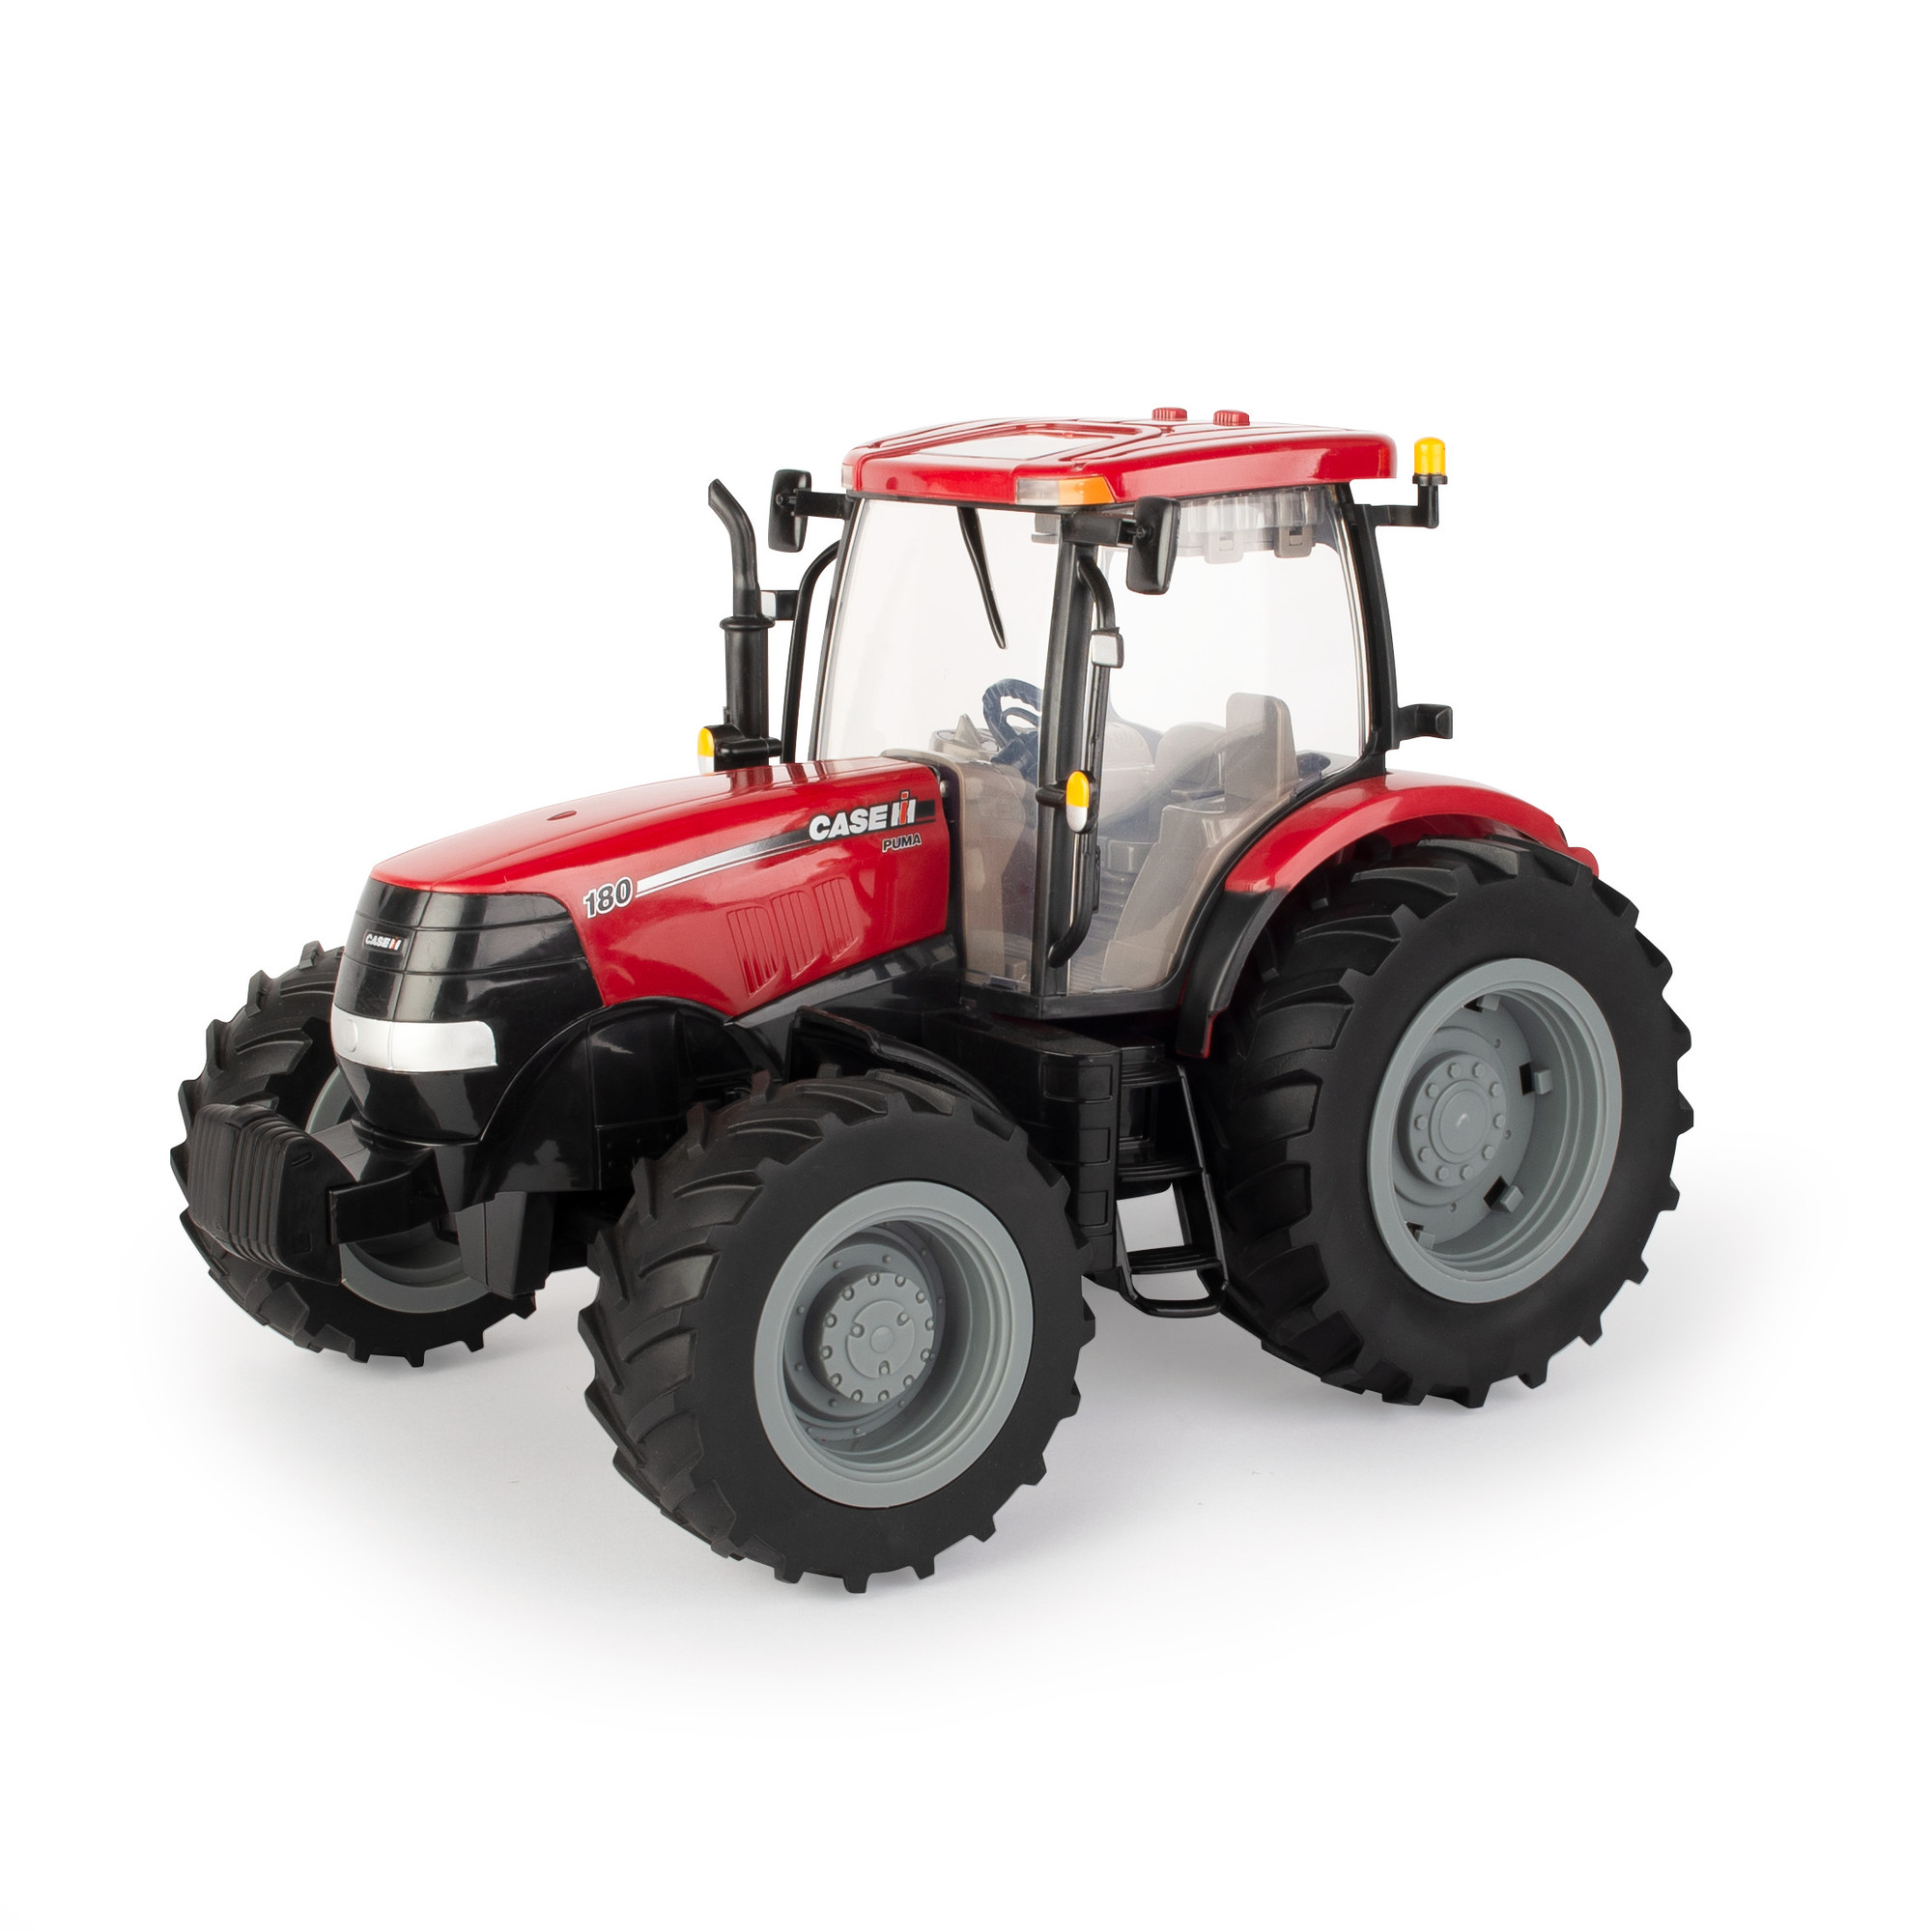 ERTL Case 1:16 Scale Big Farm 180 Toy Tractor, Plastic Toy Vehicle With Lights and Sounds - image 1 of 6